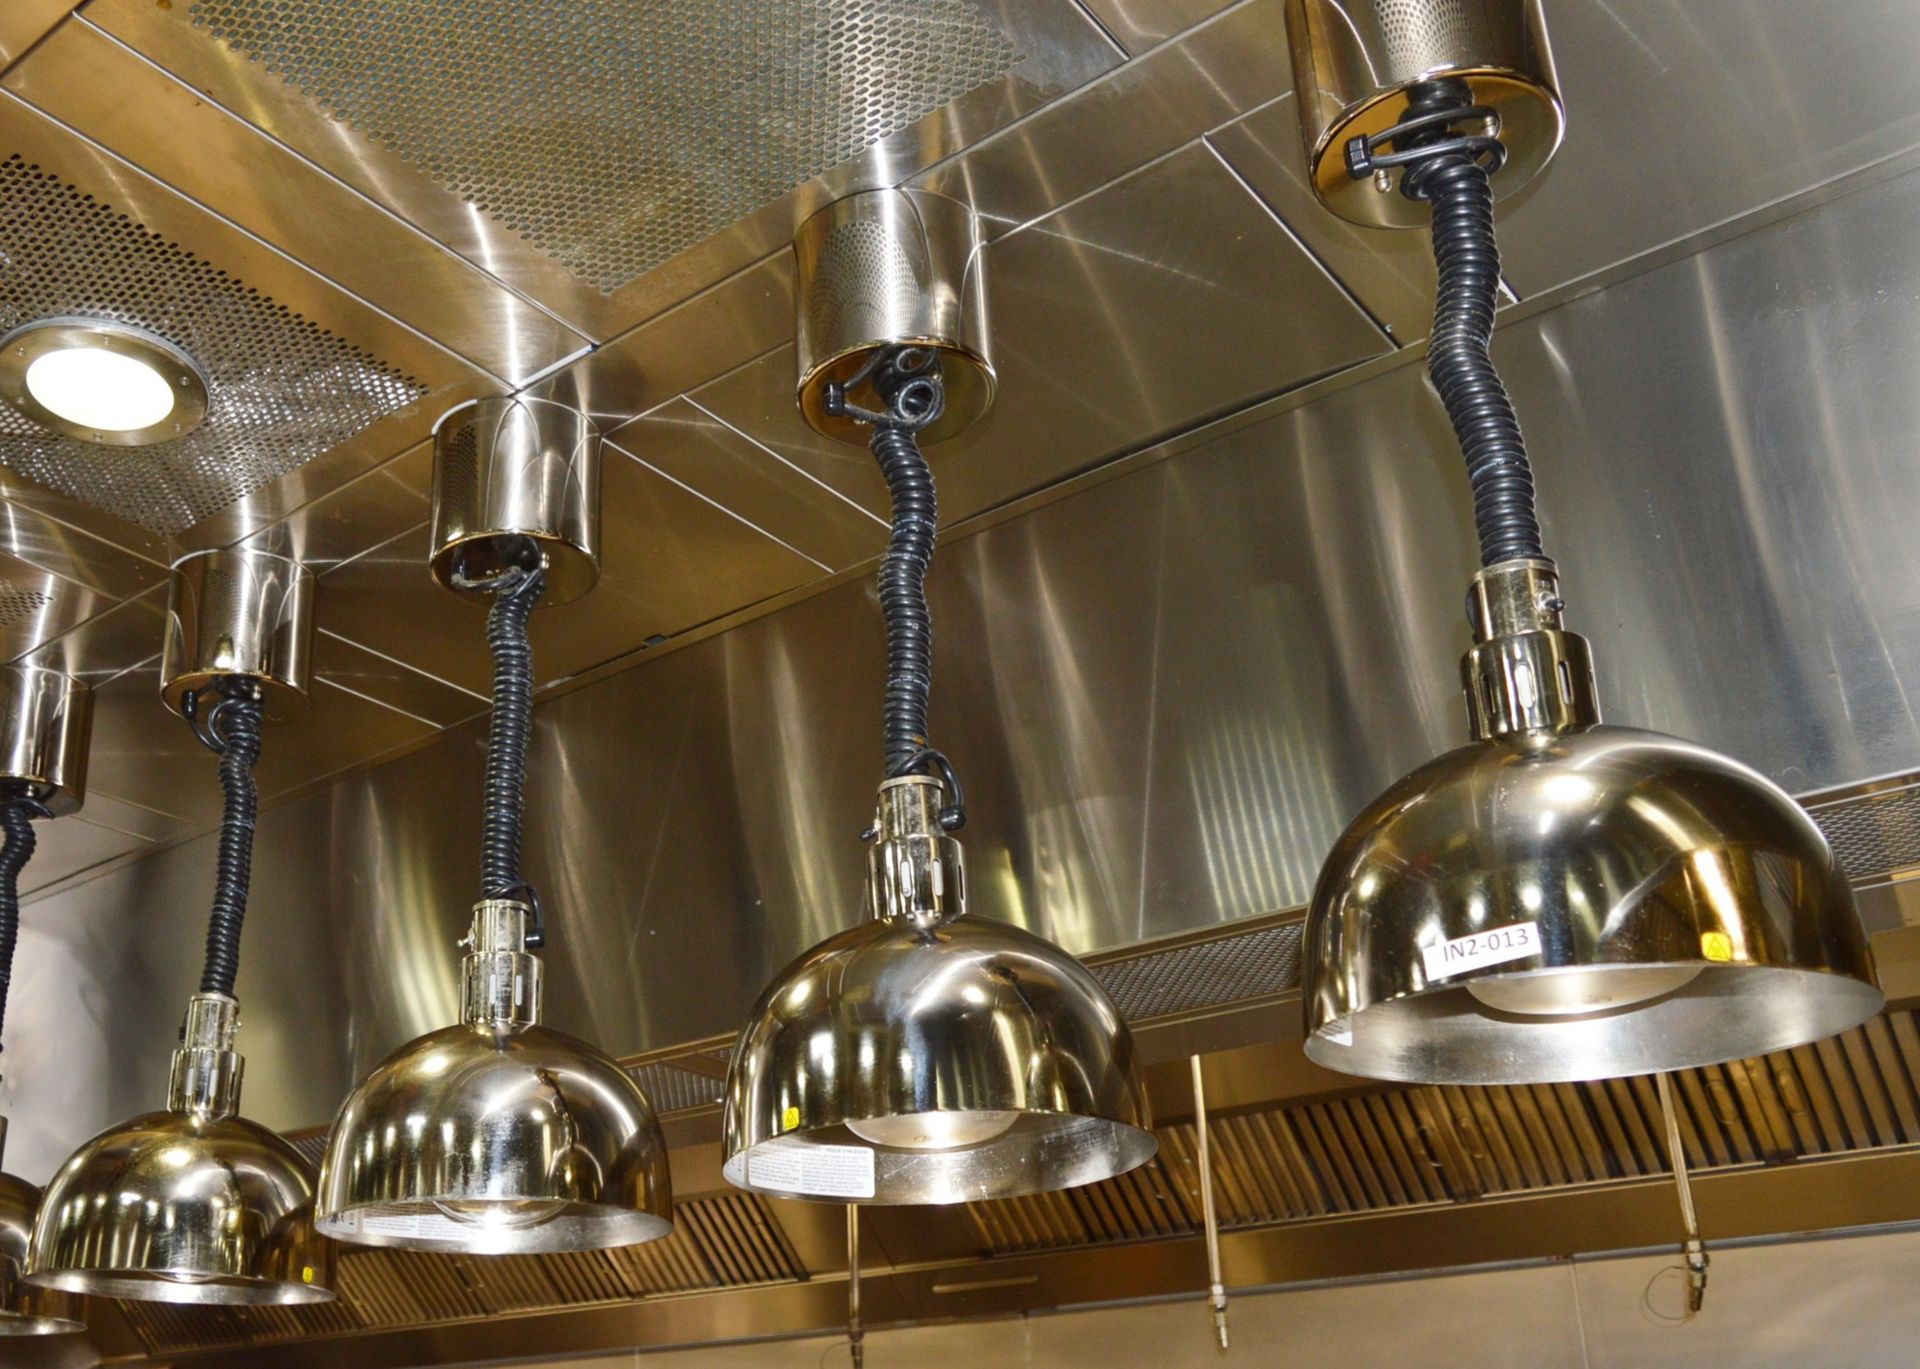 4 x Hatco DL-750-RL Hanging Retractable Heat Lamps in Bright Chrome - Keeps Food Warm at Kitchen